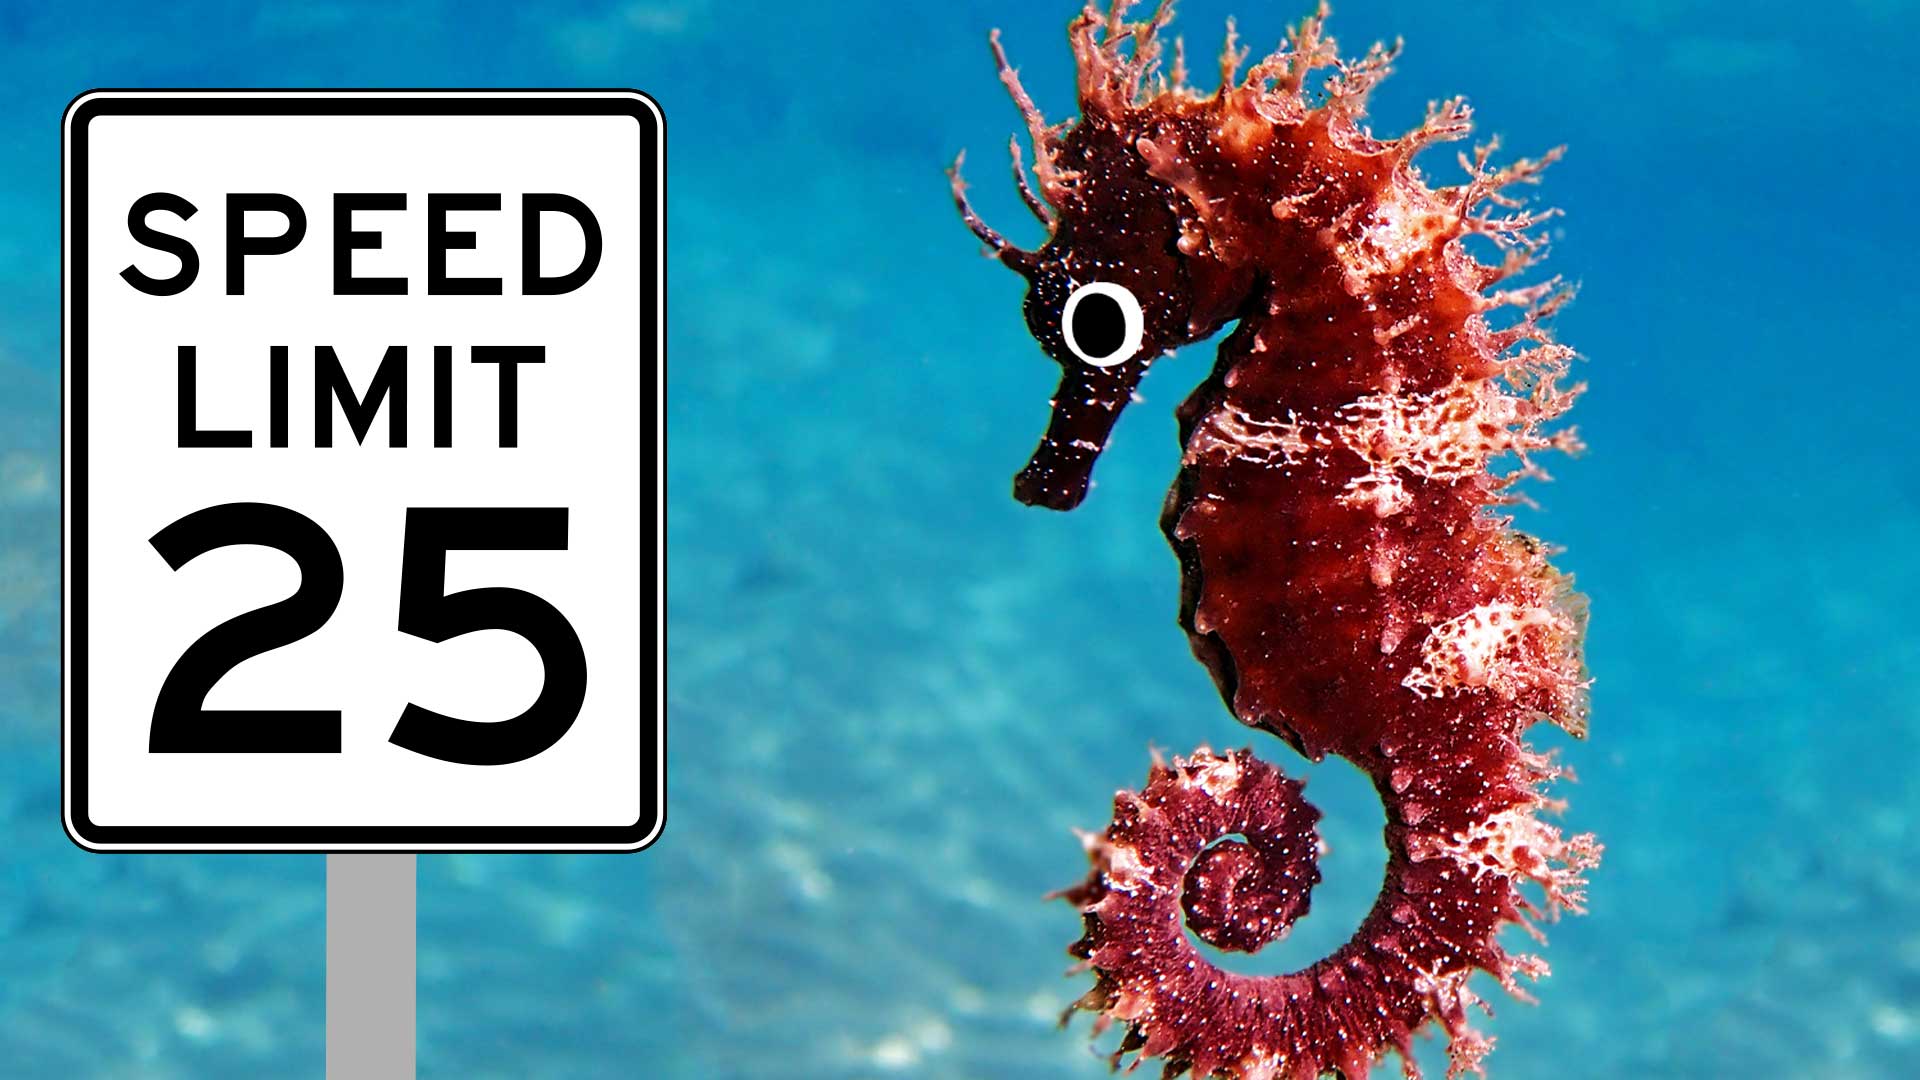 A seahorse moving past a speed limit sign